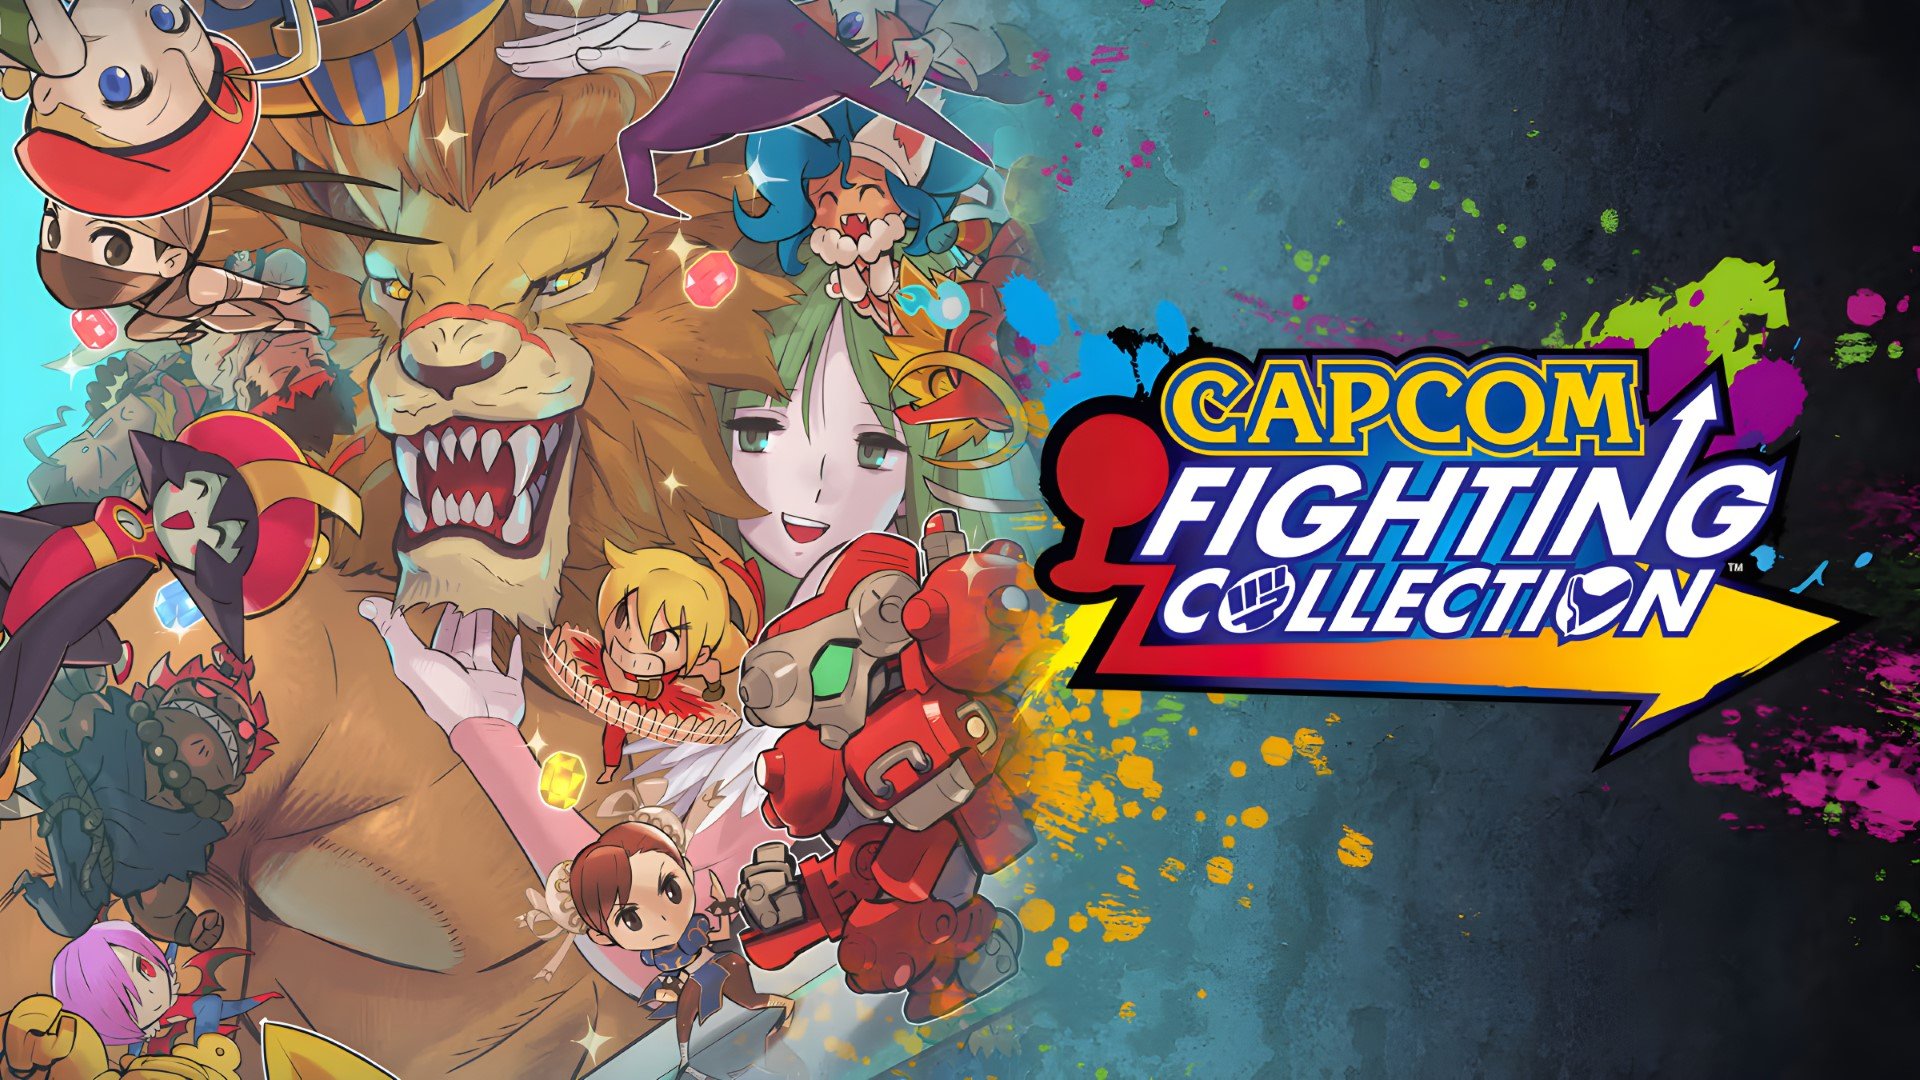 Capcom Fighting Collection Games: The Ultimate Retro Bundle?